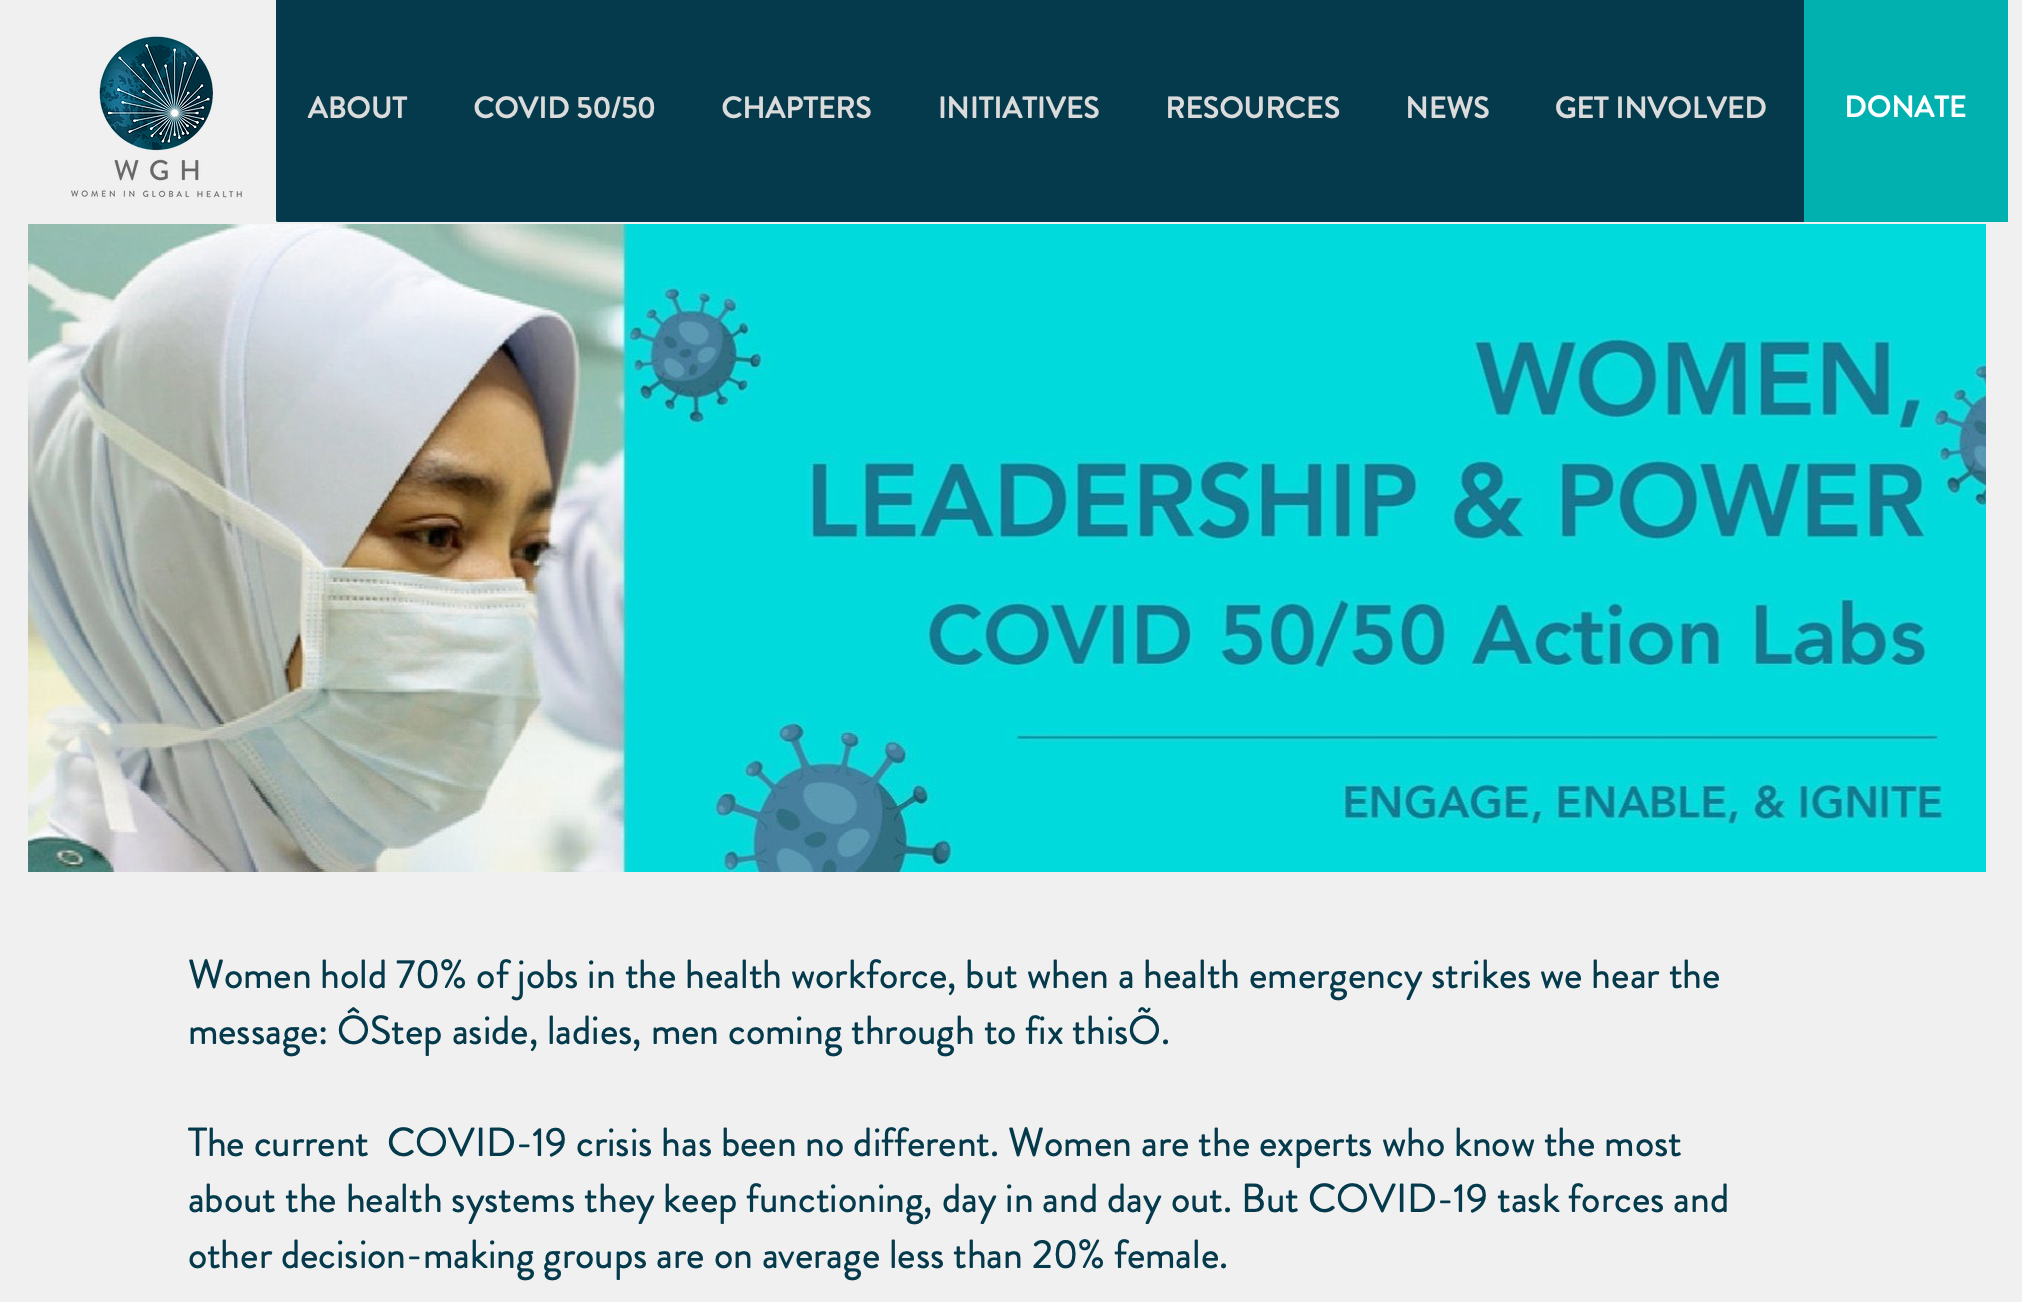 Women, leadership & power: COVID 50/50 action labs